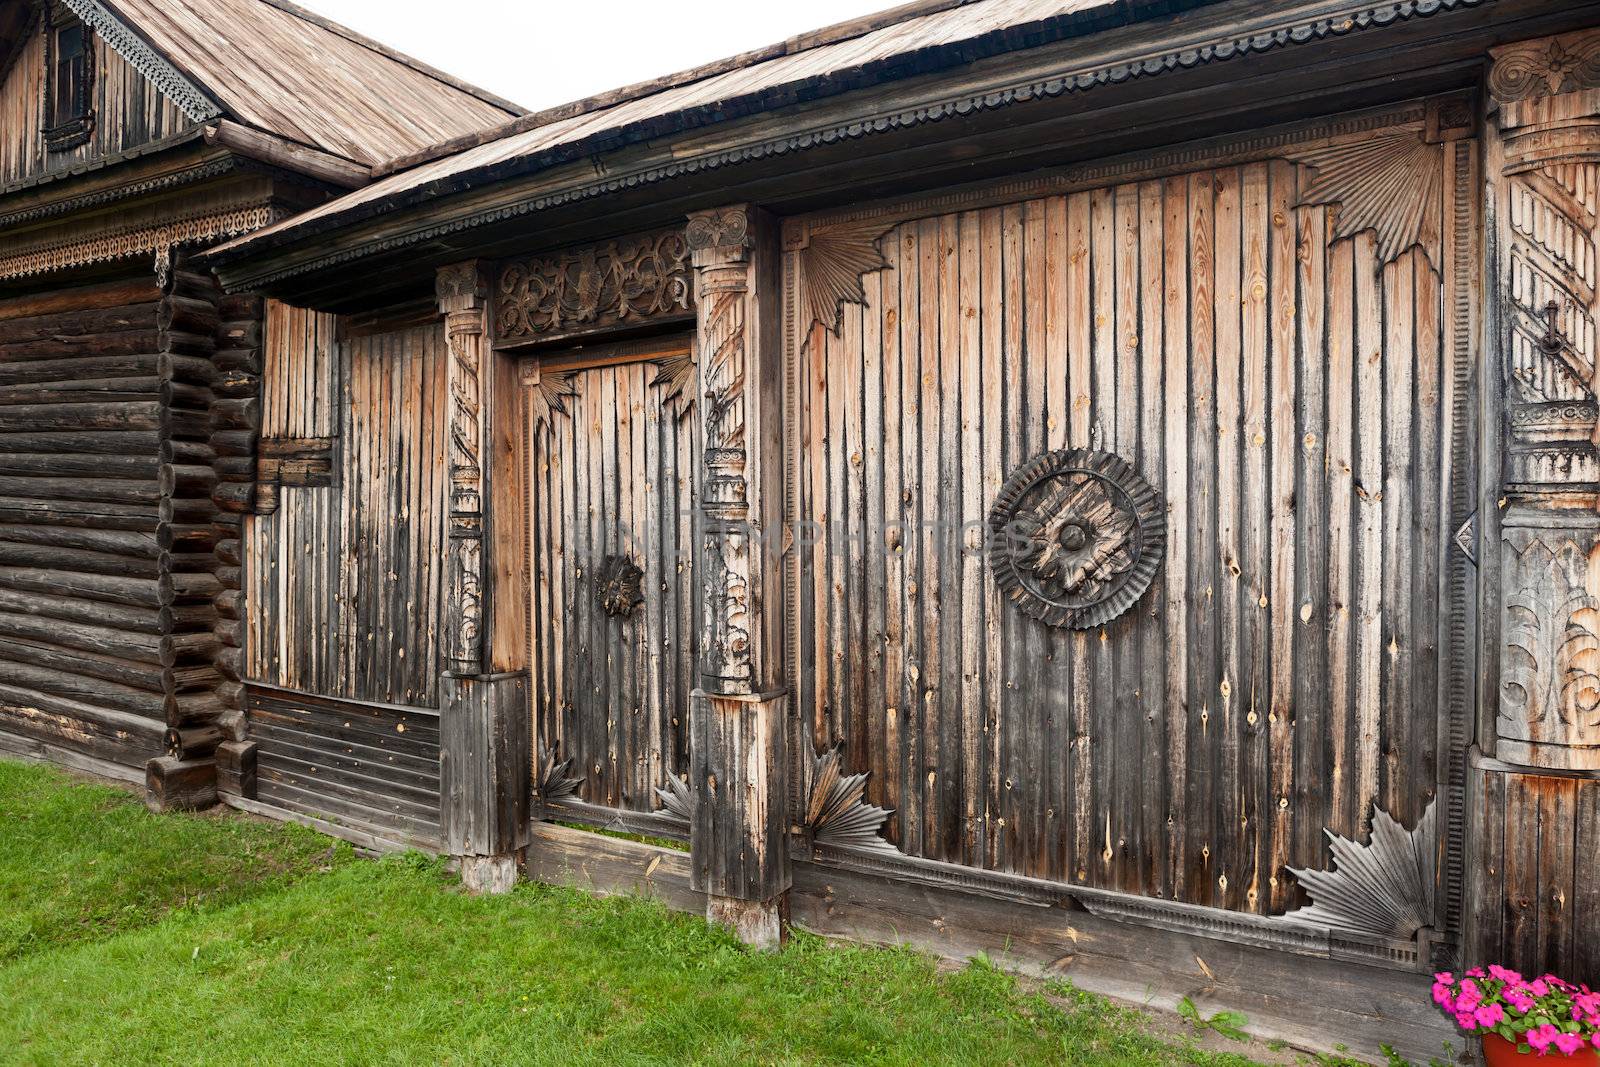 N. Sinyachikha Museum-Reserve of Wooden Architecture and Folk Art. The gate of the manor peasant XIX century. Transported from village Kamelskaya Alapaevsk district